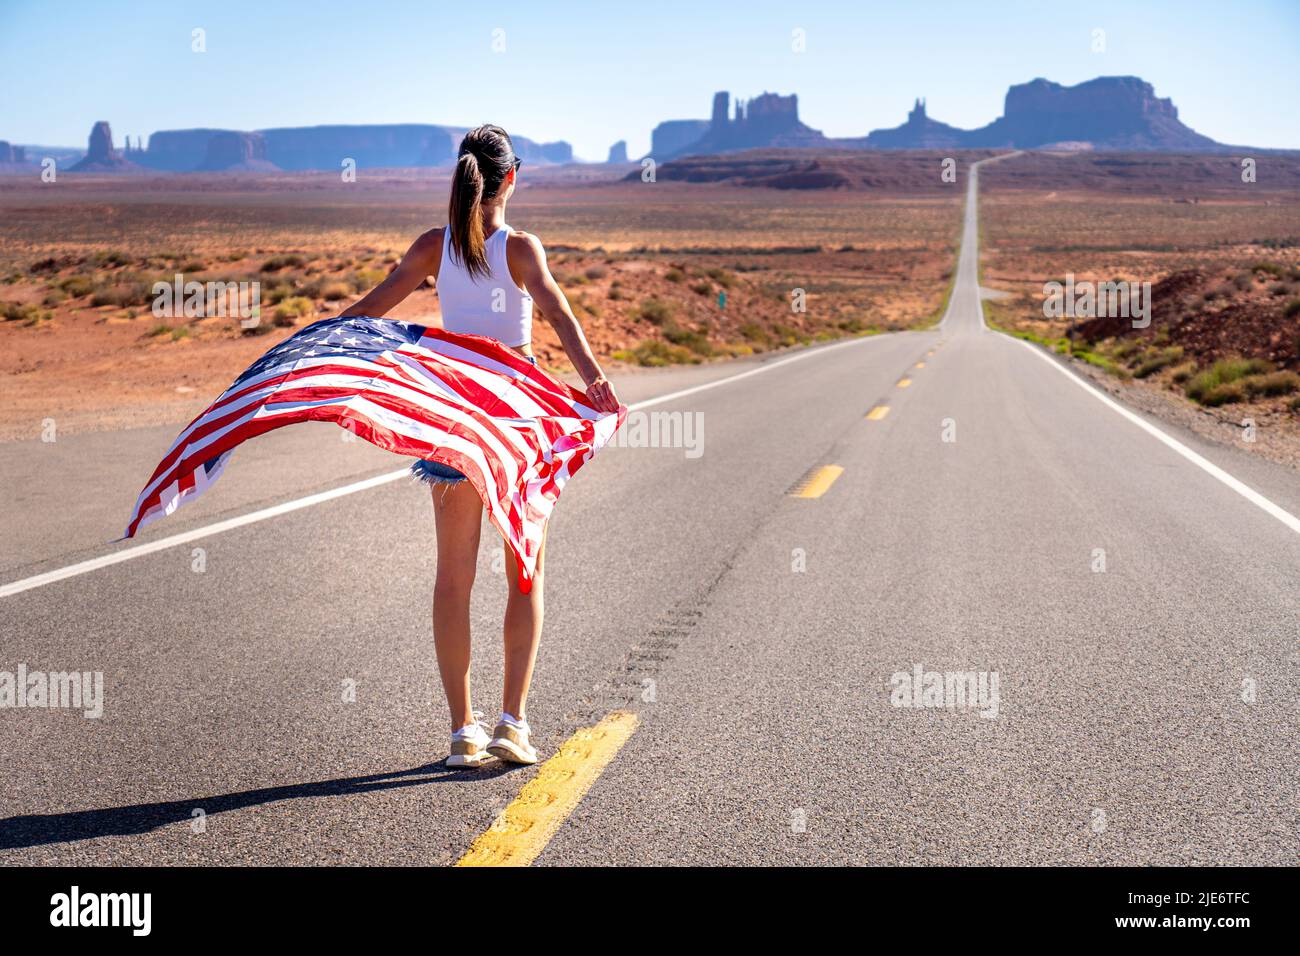 Unknown brunette girl from behind in Monument Valley holding a United States of America flag, wearing short jeans and a white tank top Stock Photo